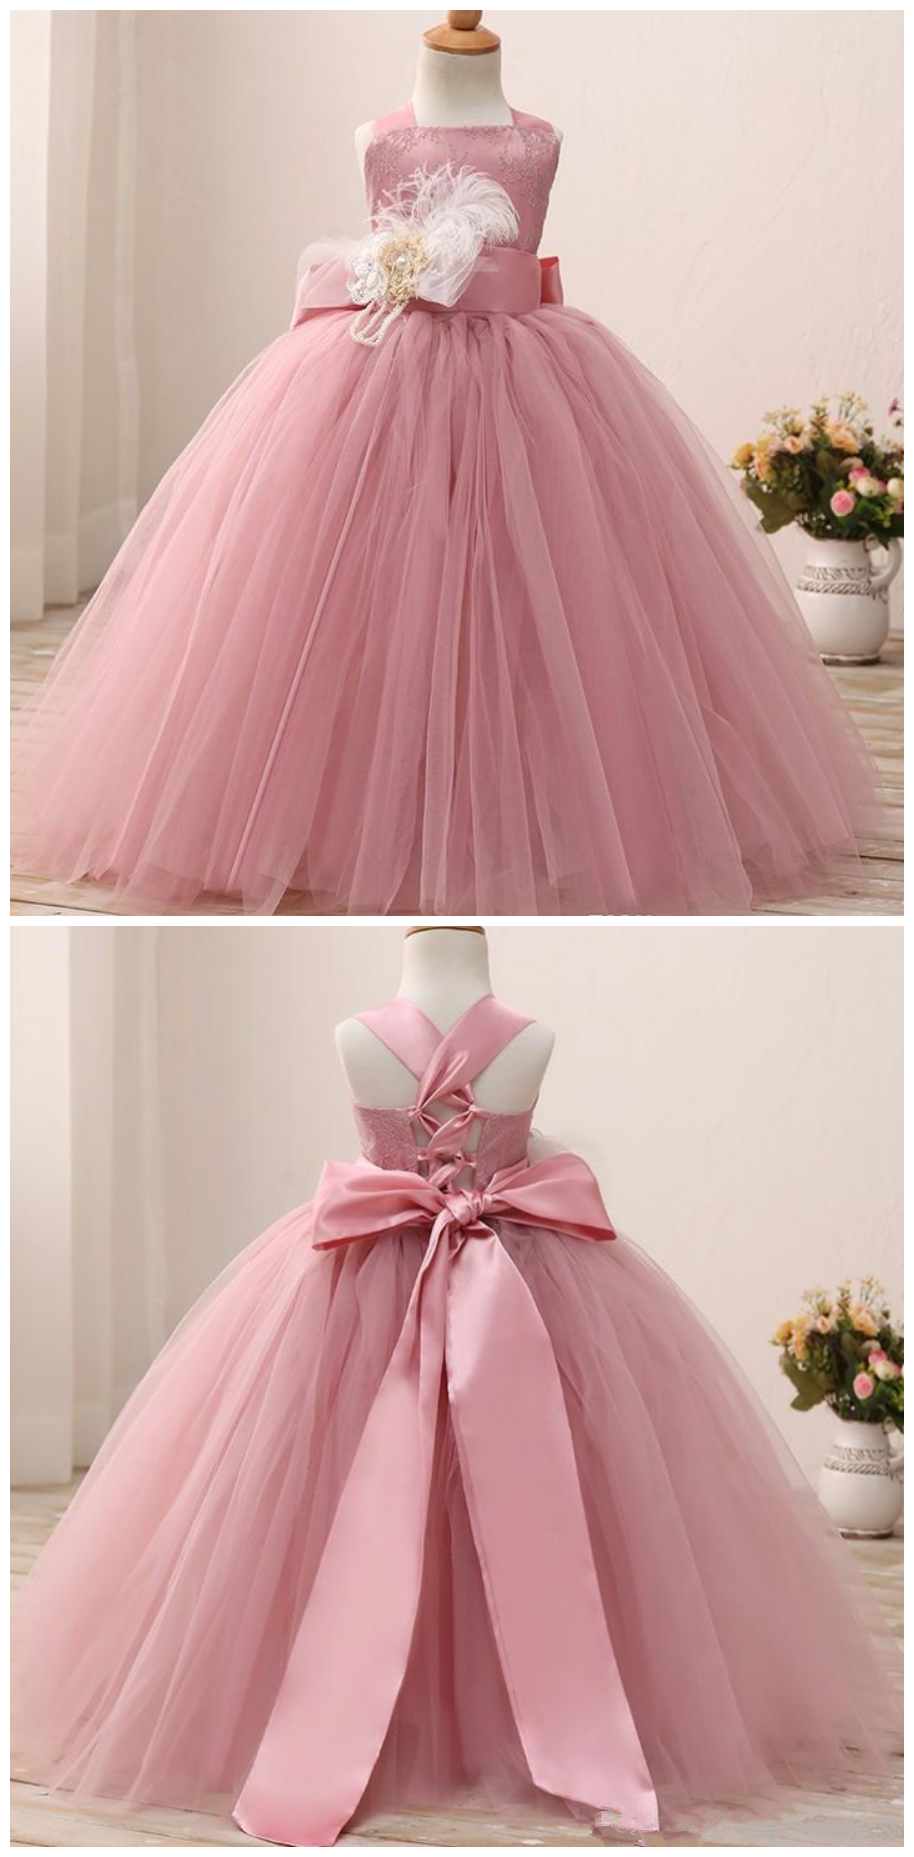 Charming Dusty Rose Toddler Flower Girls Dresses For Wedding With Straps Feather Flowers Lace Tulle Ball Gowns Girls Formal Pageant Dresses